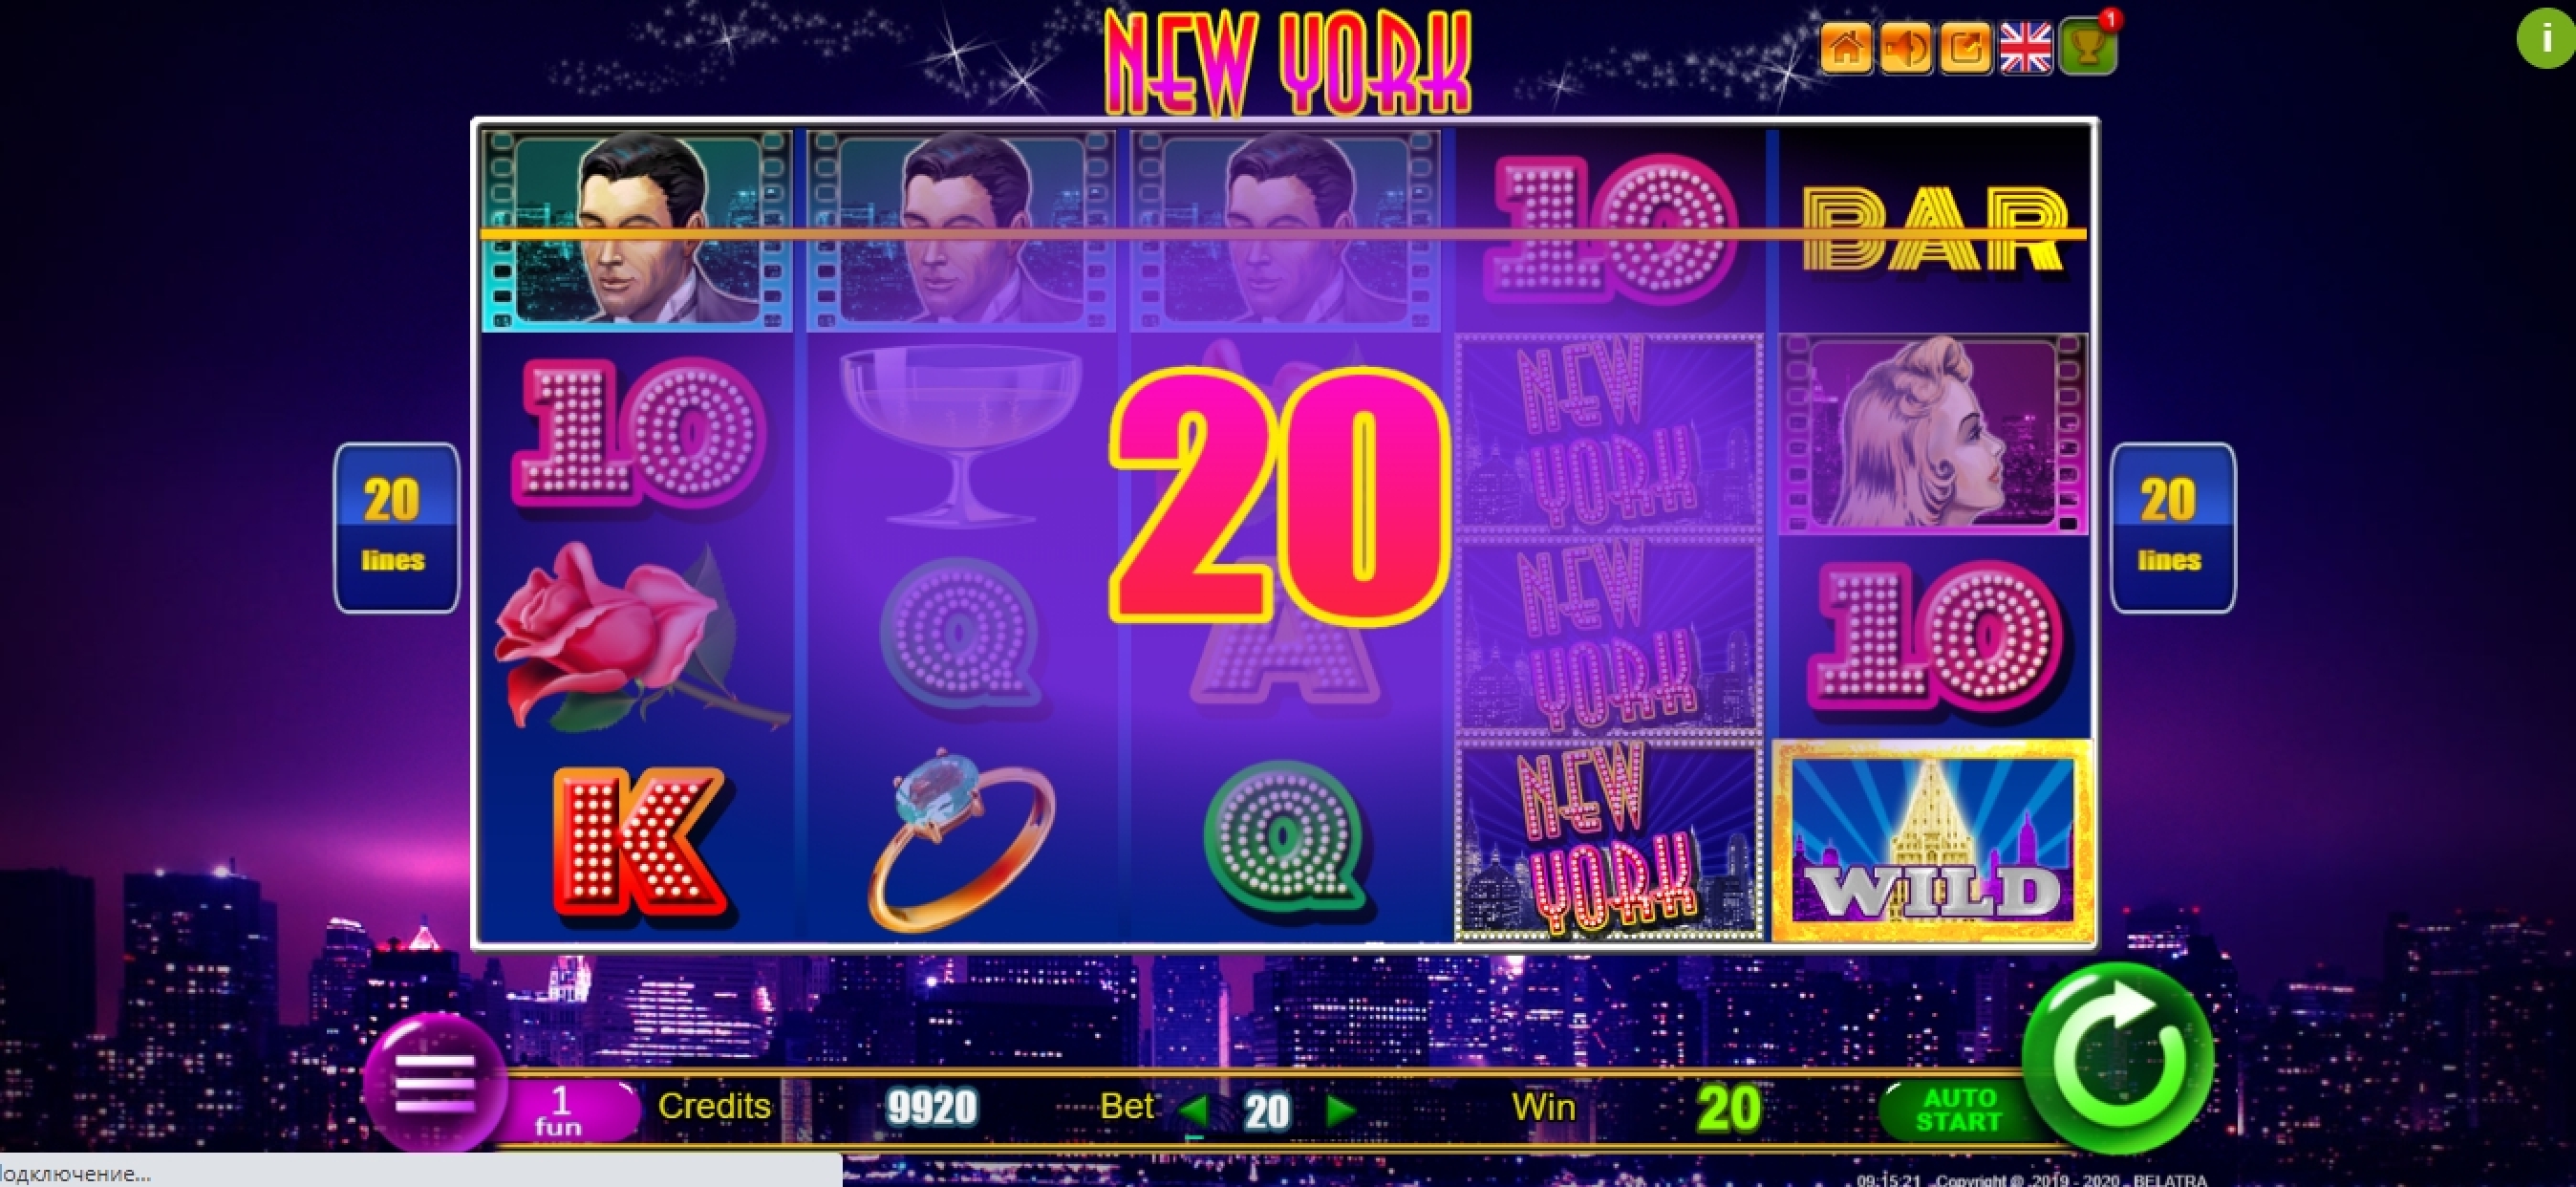 Win Money in New York Free Slot Game by Belatra Games